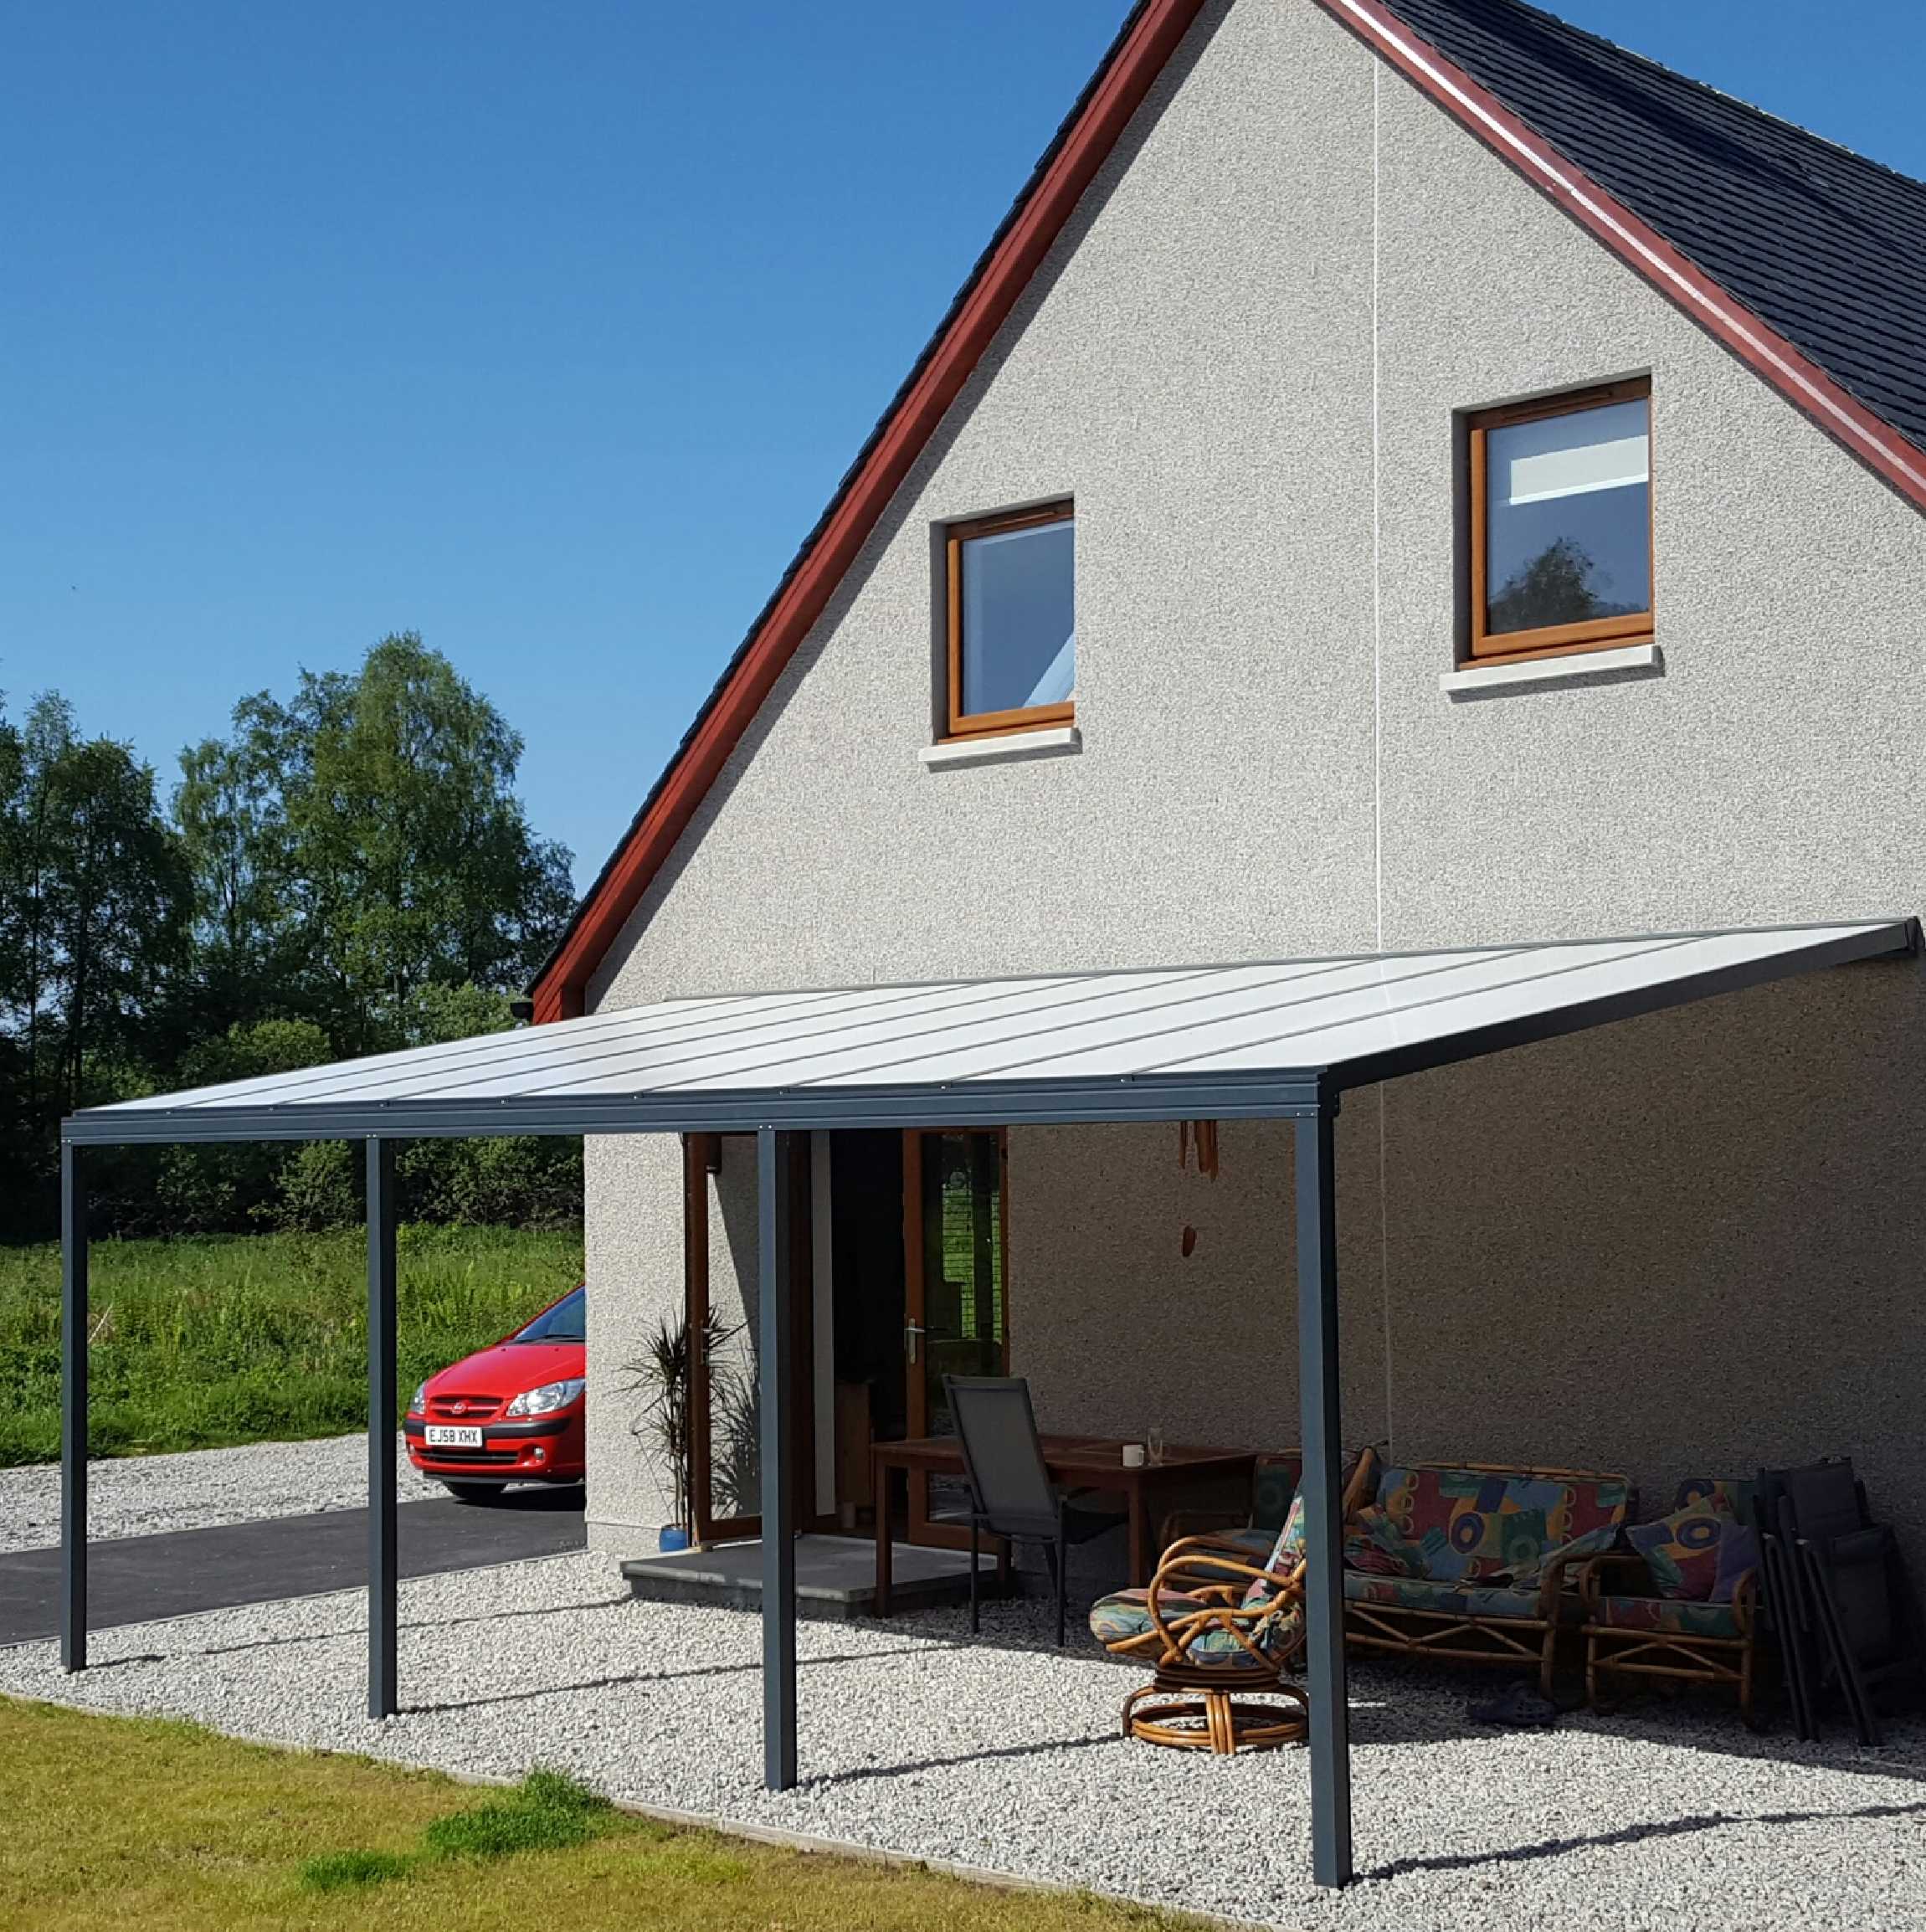 Great selection of SPECIAL OFFER Omega Smart Lean-To Canopy, Anthracite Grey, 16mm Polycarbonate Glazing - 6.0m (W) x 2.5m (P), (3) Supporting Posts